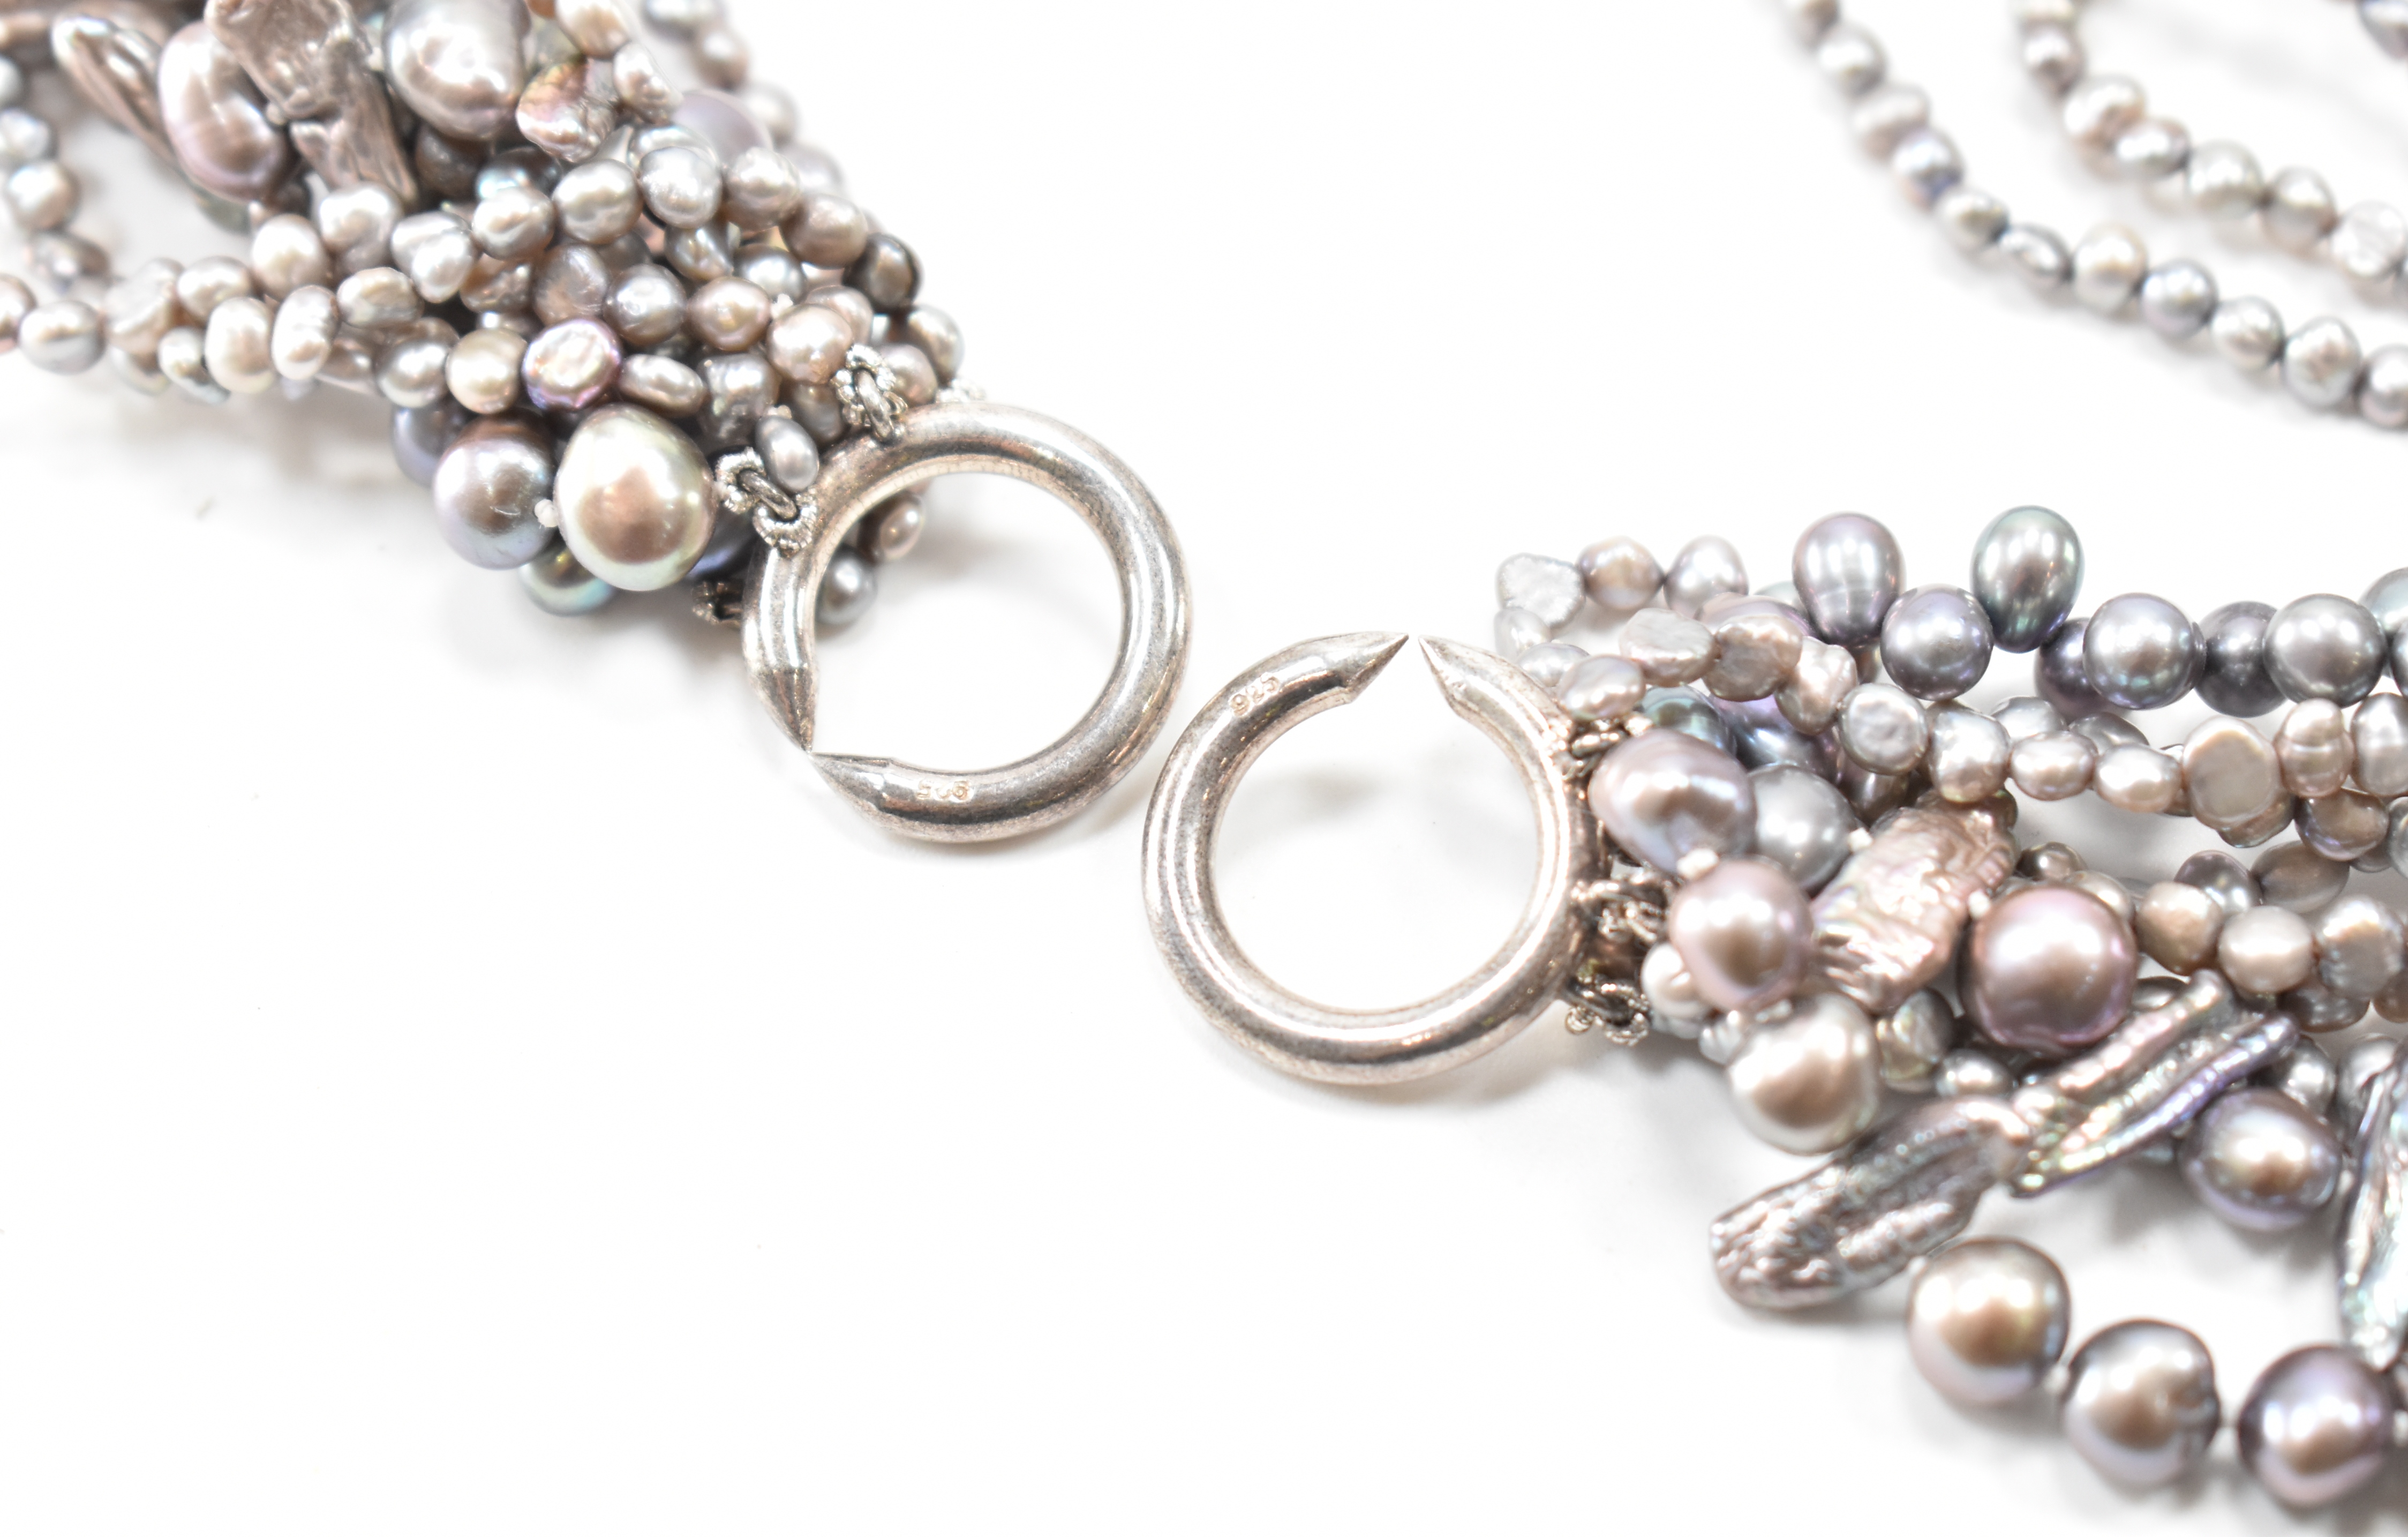 SILVER & CULTURED PEARL NECKLACE - Image 3 of 3